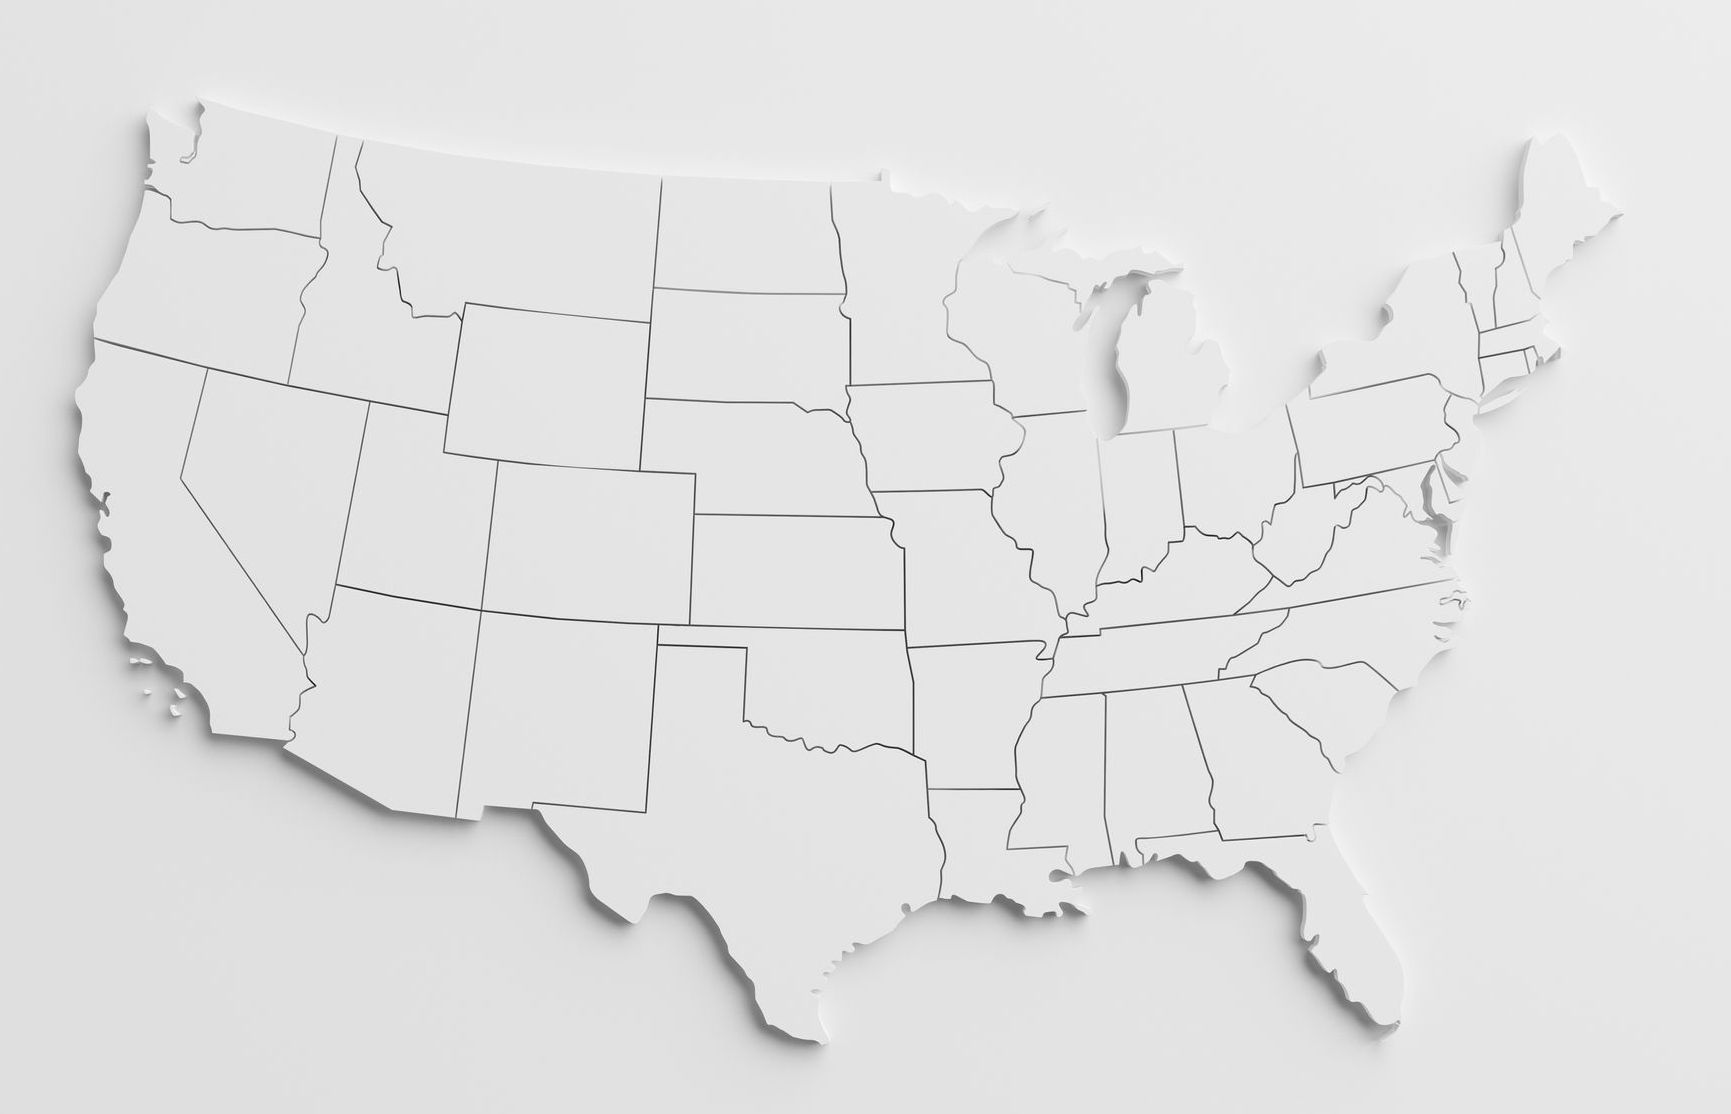 A cut-out map of the united states on a white background.